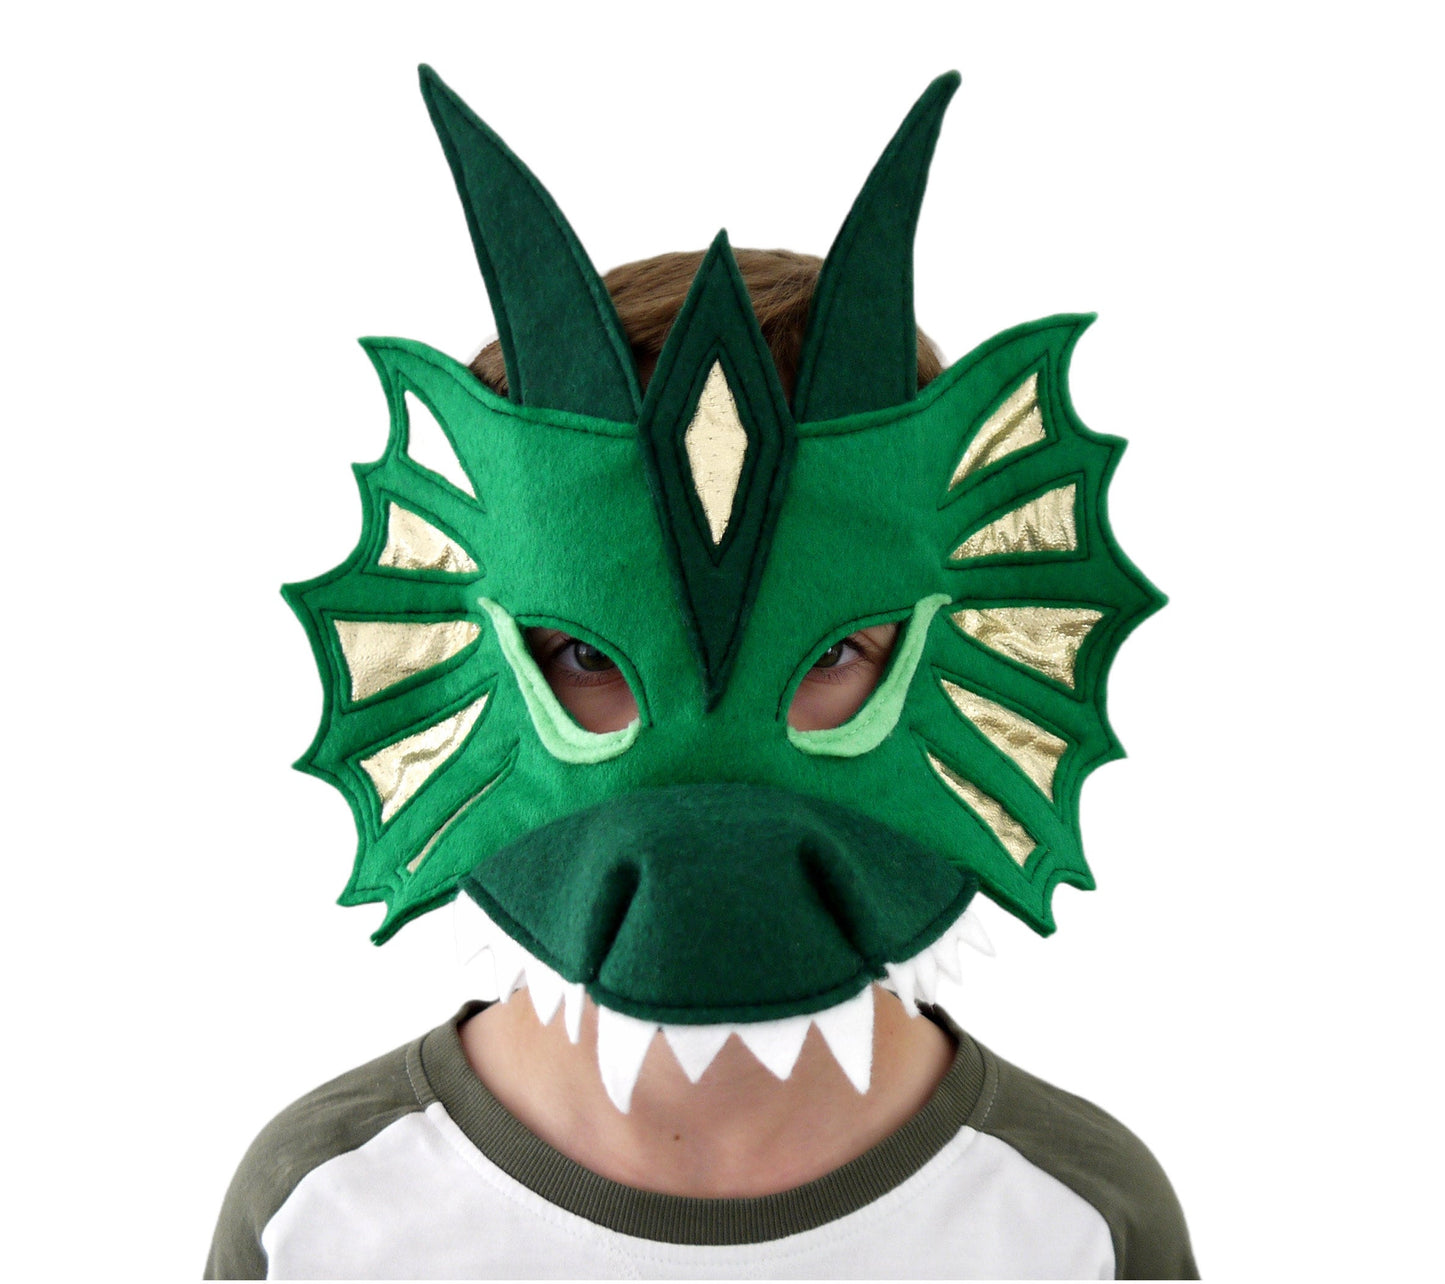 Dragon mask costume, Halloween boys girls gift. Book day, adult or child size, fantasy, cosplay, dress up, theatre